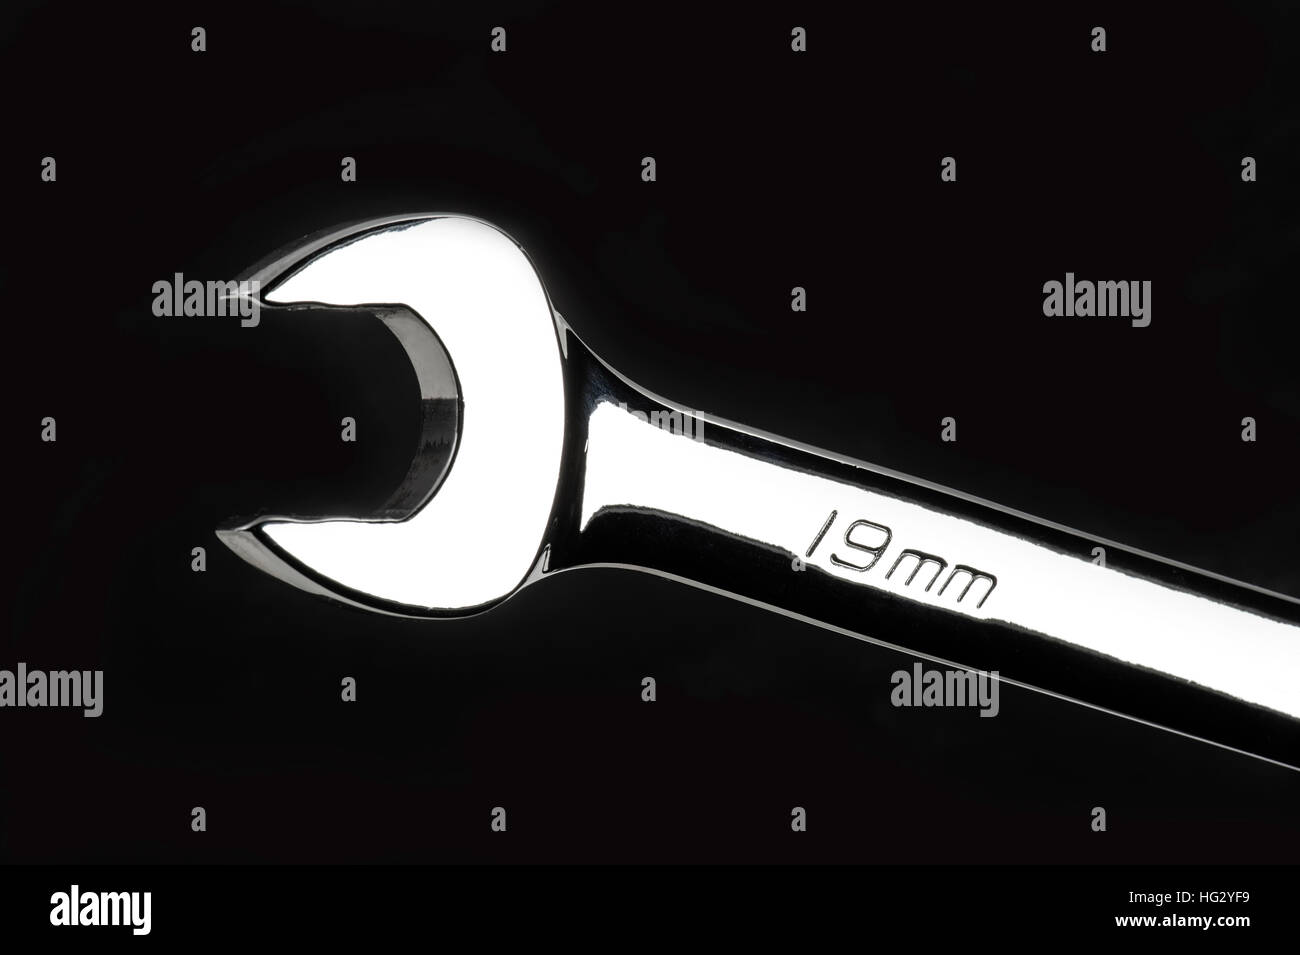 Shiny Metal 19mm Open End Wrench Stock Photo